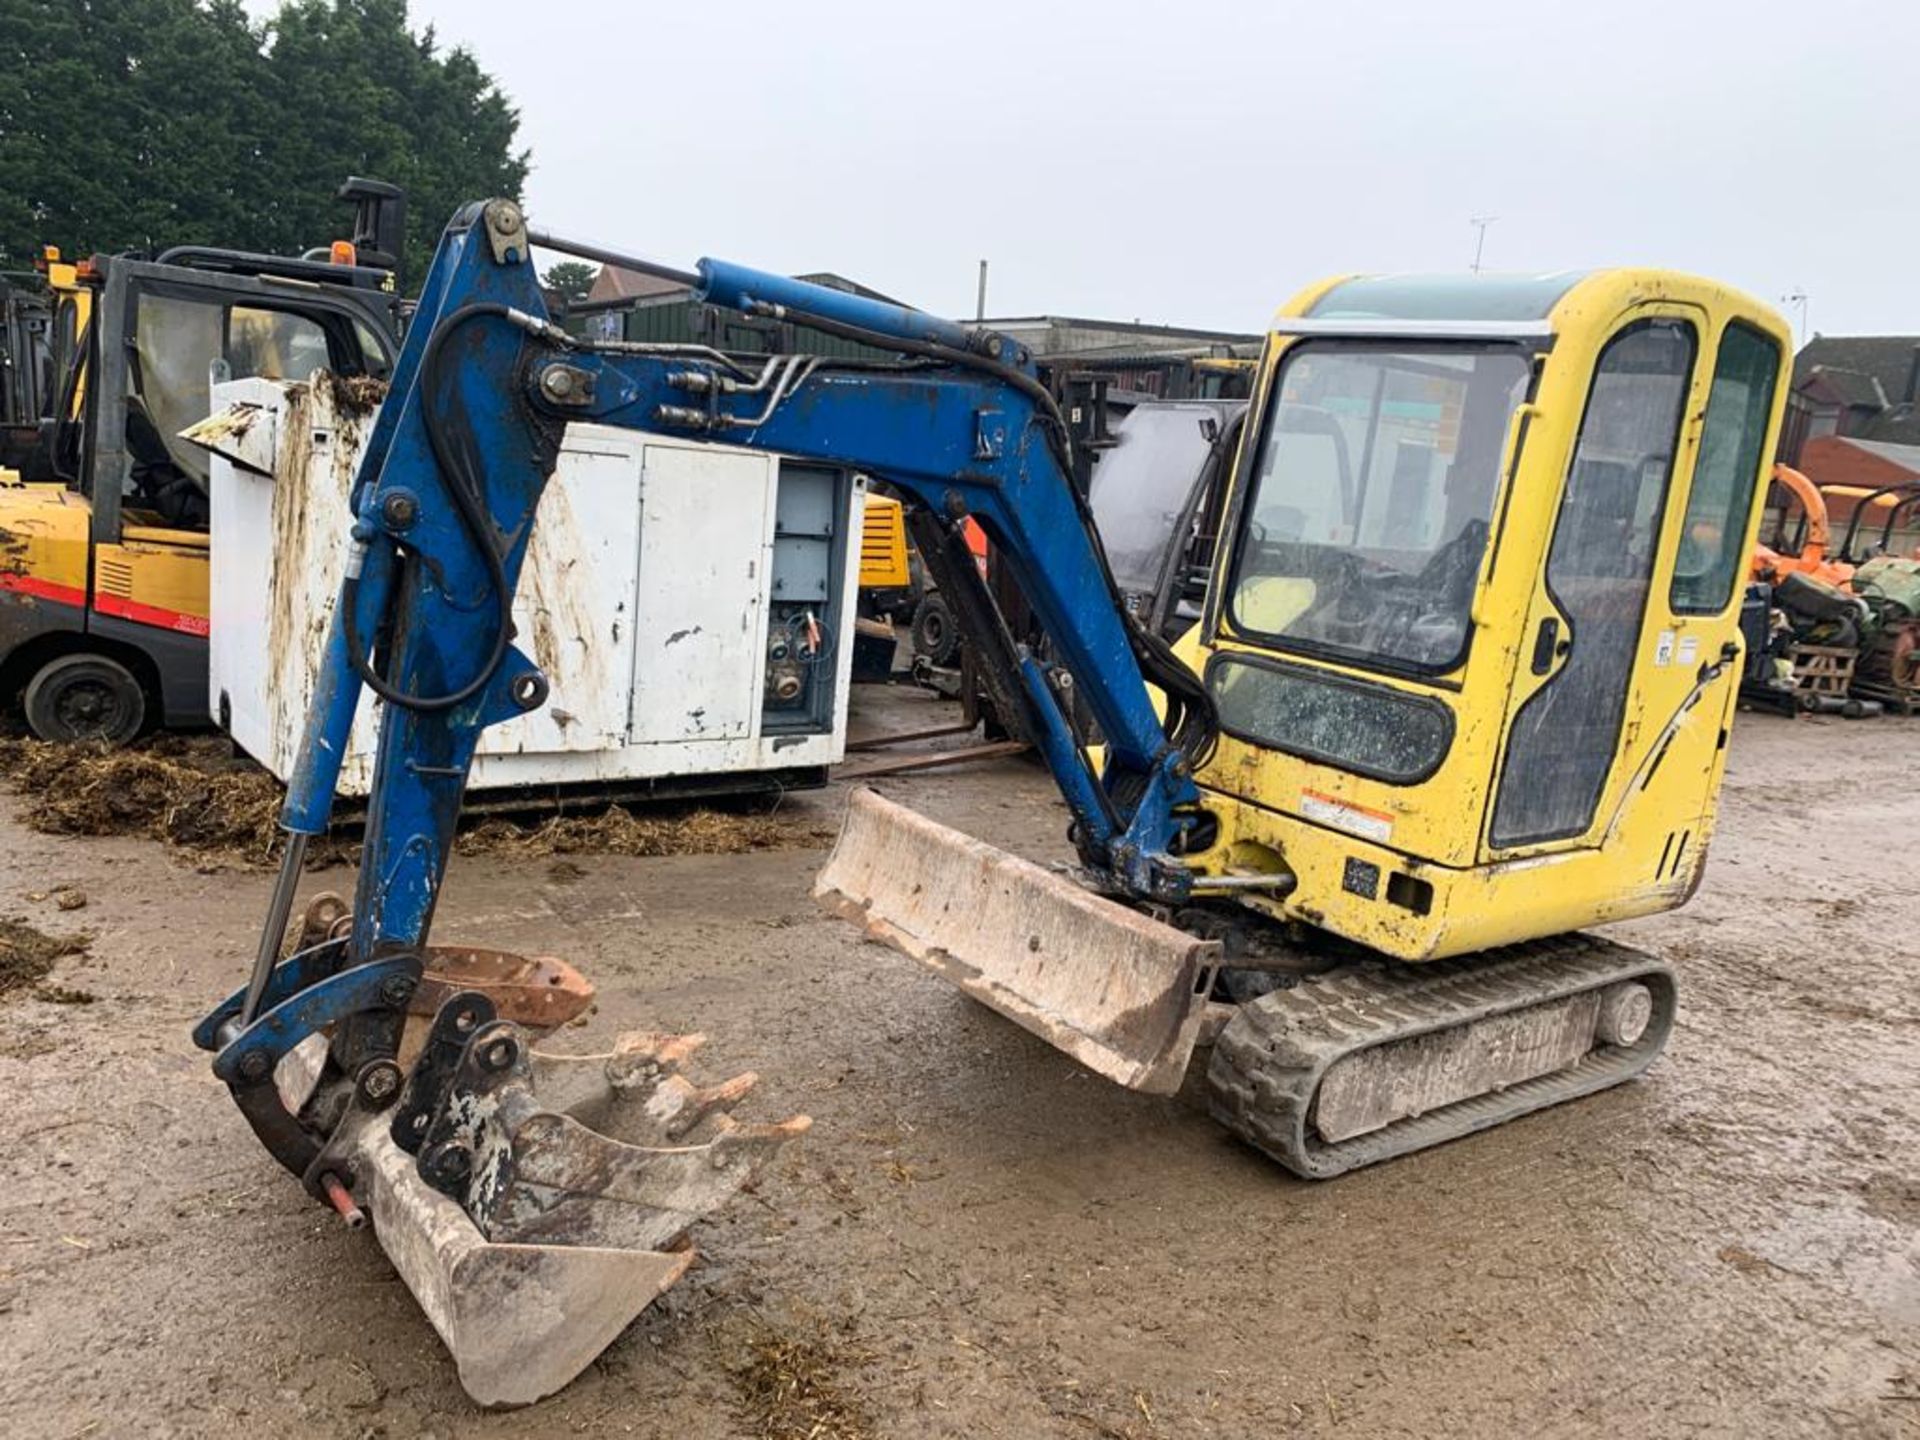 BOBCAT 328 YELLOW / BLUE TRACKED CRAWLER EXCAVATOR, C/W 3 X BUCKETS, RUNS, WORKS AND DIGS *PLUS VAT* - Image 2 of 6